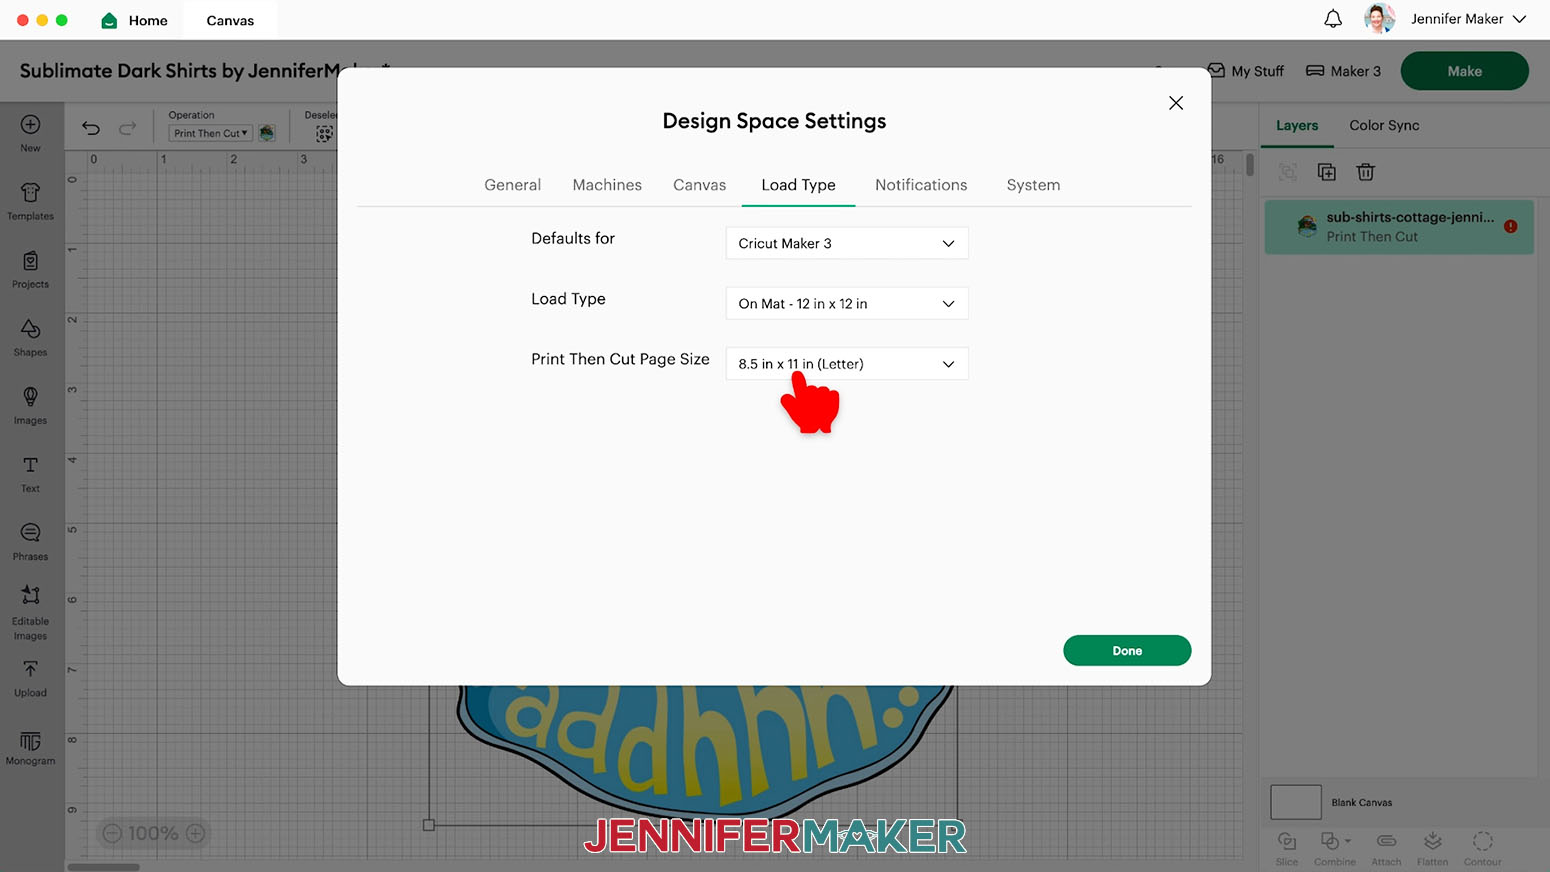 If there is a red icon in the Layers Panel, click it and make sure the paper size mentioned matches your material. If not, click “Change Page Size” and adjust it. I’m using 8.5” x 11” paper.